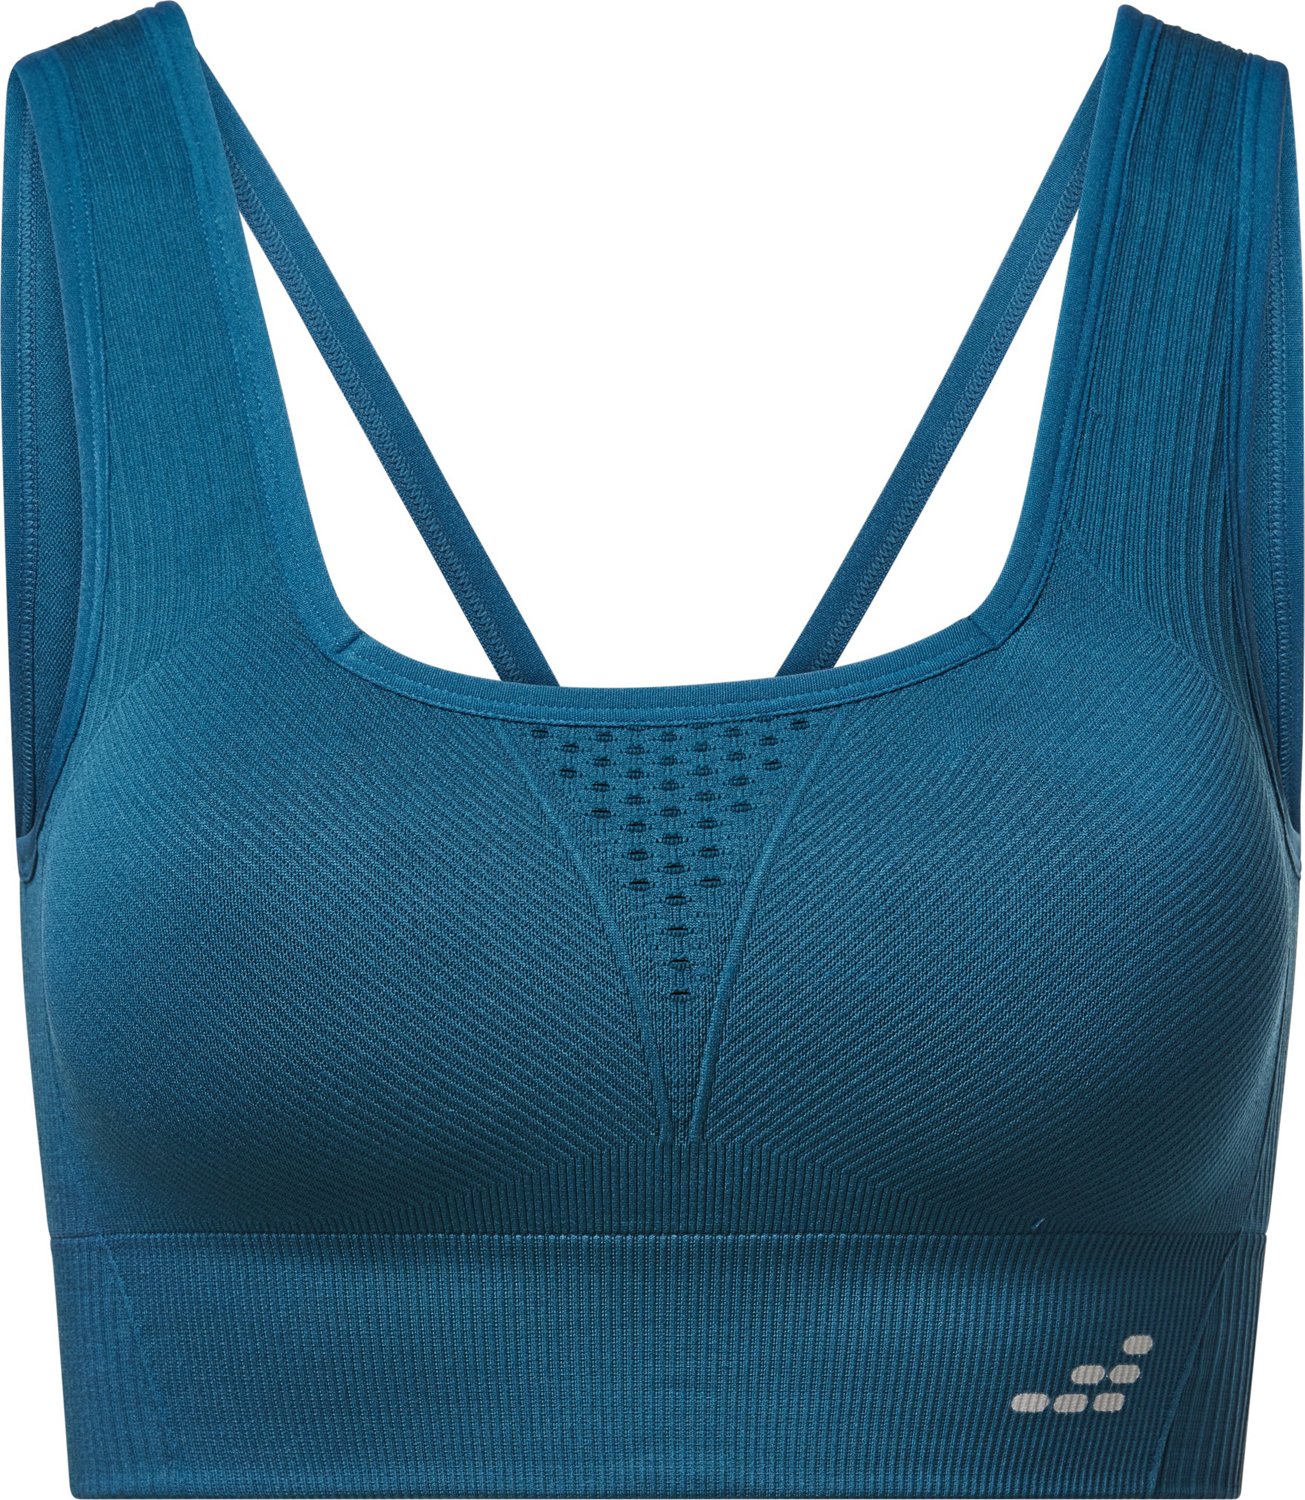 BCG Womens SMLS Square Front Low Support Sports Bra